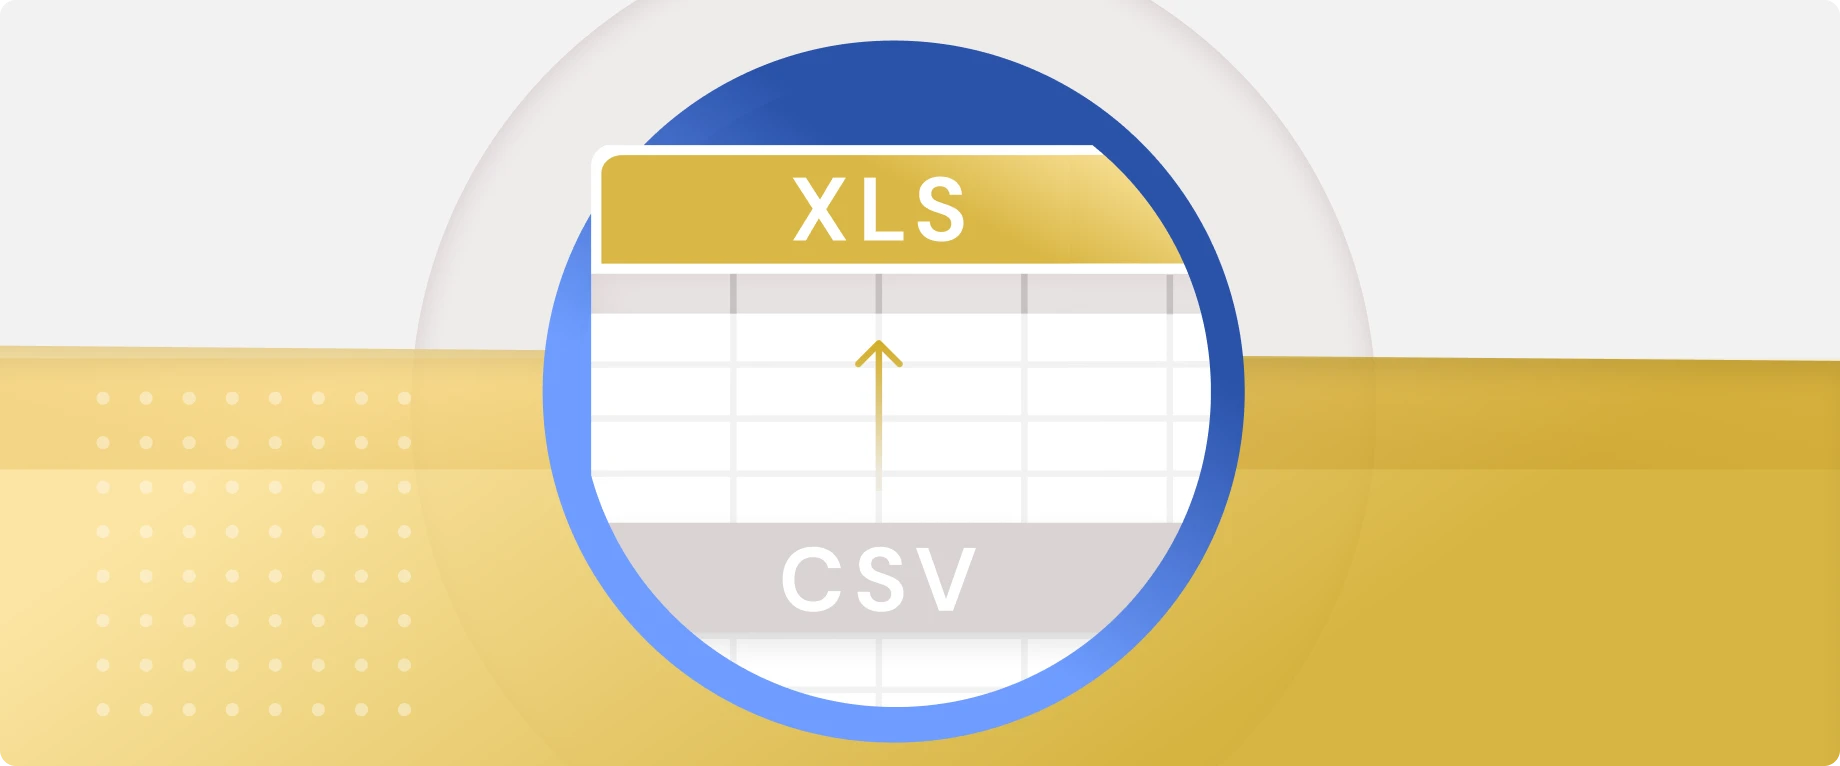 How to Ensure Excel is Defaulted for Importing CSV